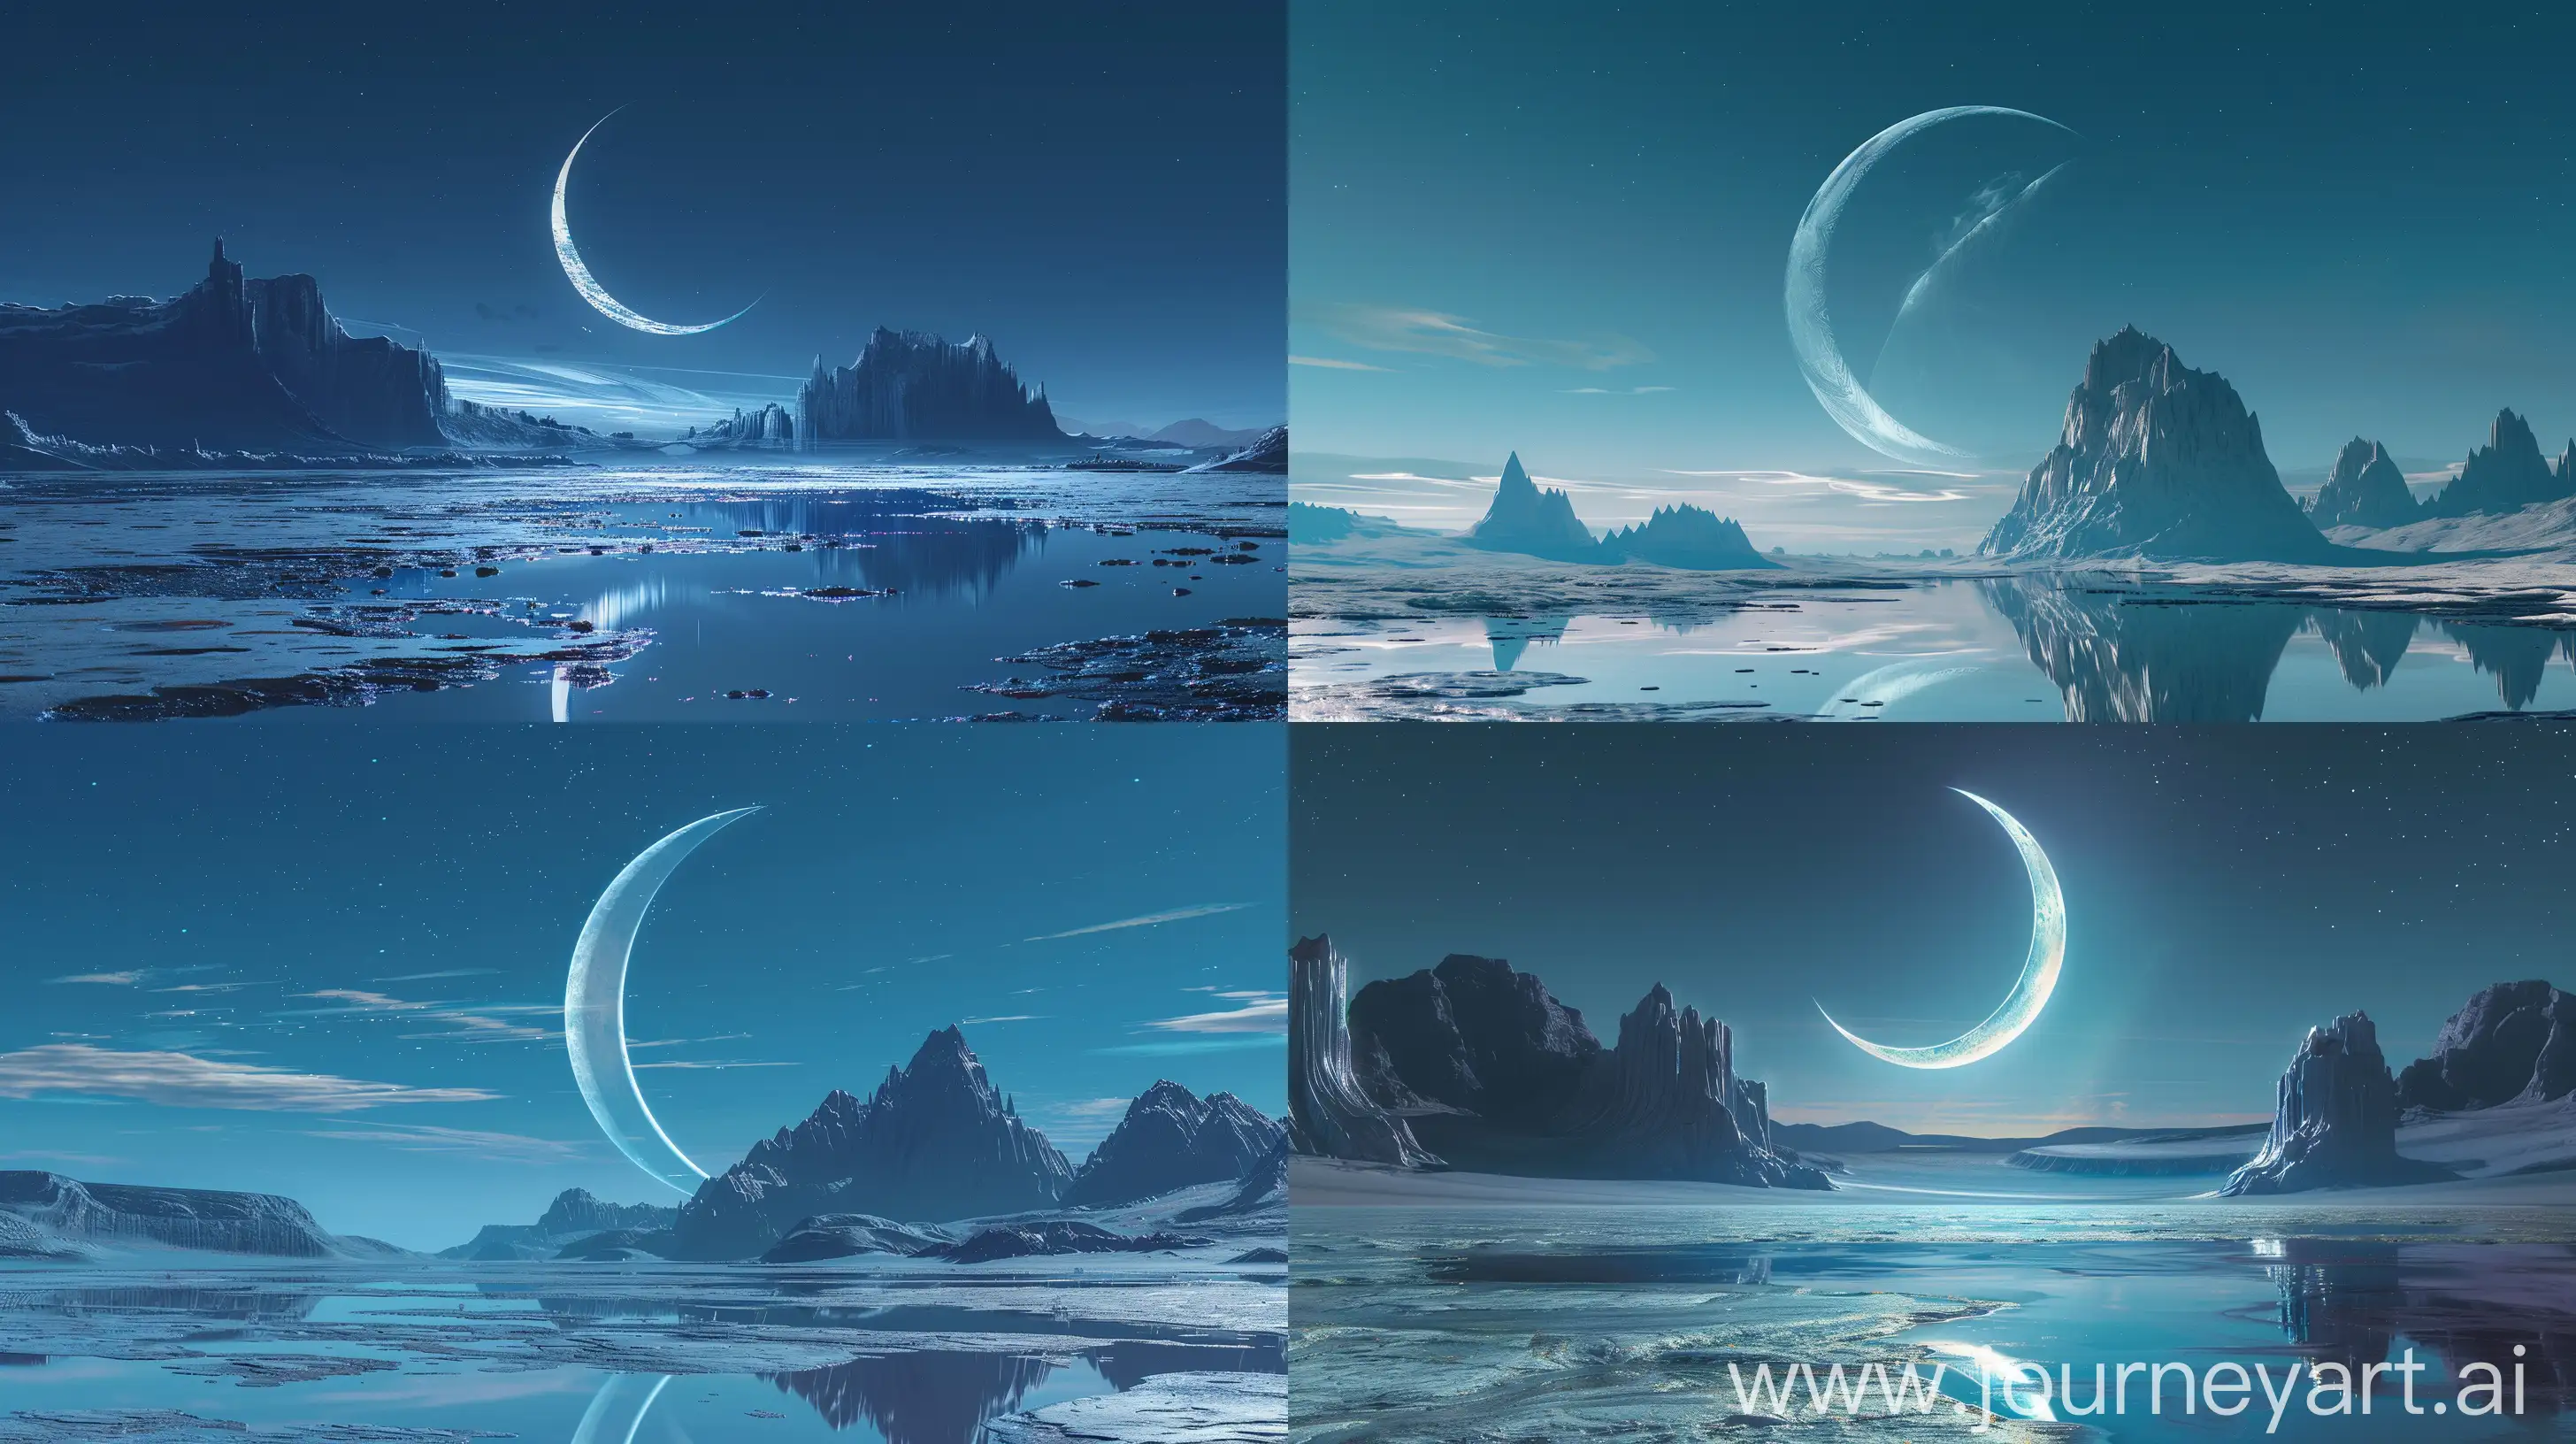 a serene alien landscape at night, dominated by a massive crescent moon. The scene is set on an extraterrestrial planet with a sweeping view of towering mountains and a reflective ice-like surface that might be mistaken for a tranquil sea or vast desert. The palette is a study in cool blues and silvers, suggesting the chill of an otherworldly evening. There should be an overwhelming sense of peace and isolation, where the only witness to the scene might be the viewer. The composition should be wide and open, with a clear, starless sky that allows the crescent moon to be the focal point, casting its gentle light across the landscape. The image should have a crystal-clear quality, high contrast, and thoughtful use of negative space that could suit a sci-fi movie poster or a gallery of futuristic concept art --ar 16:9